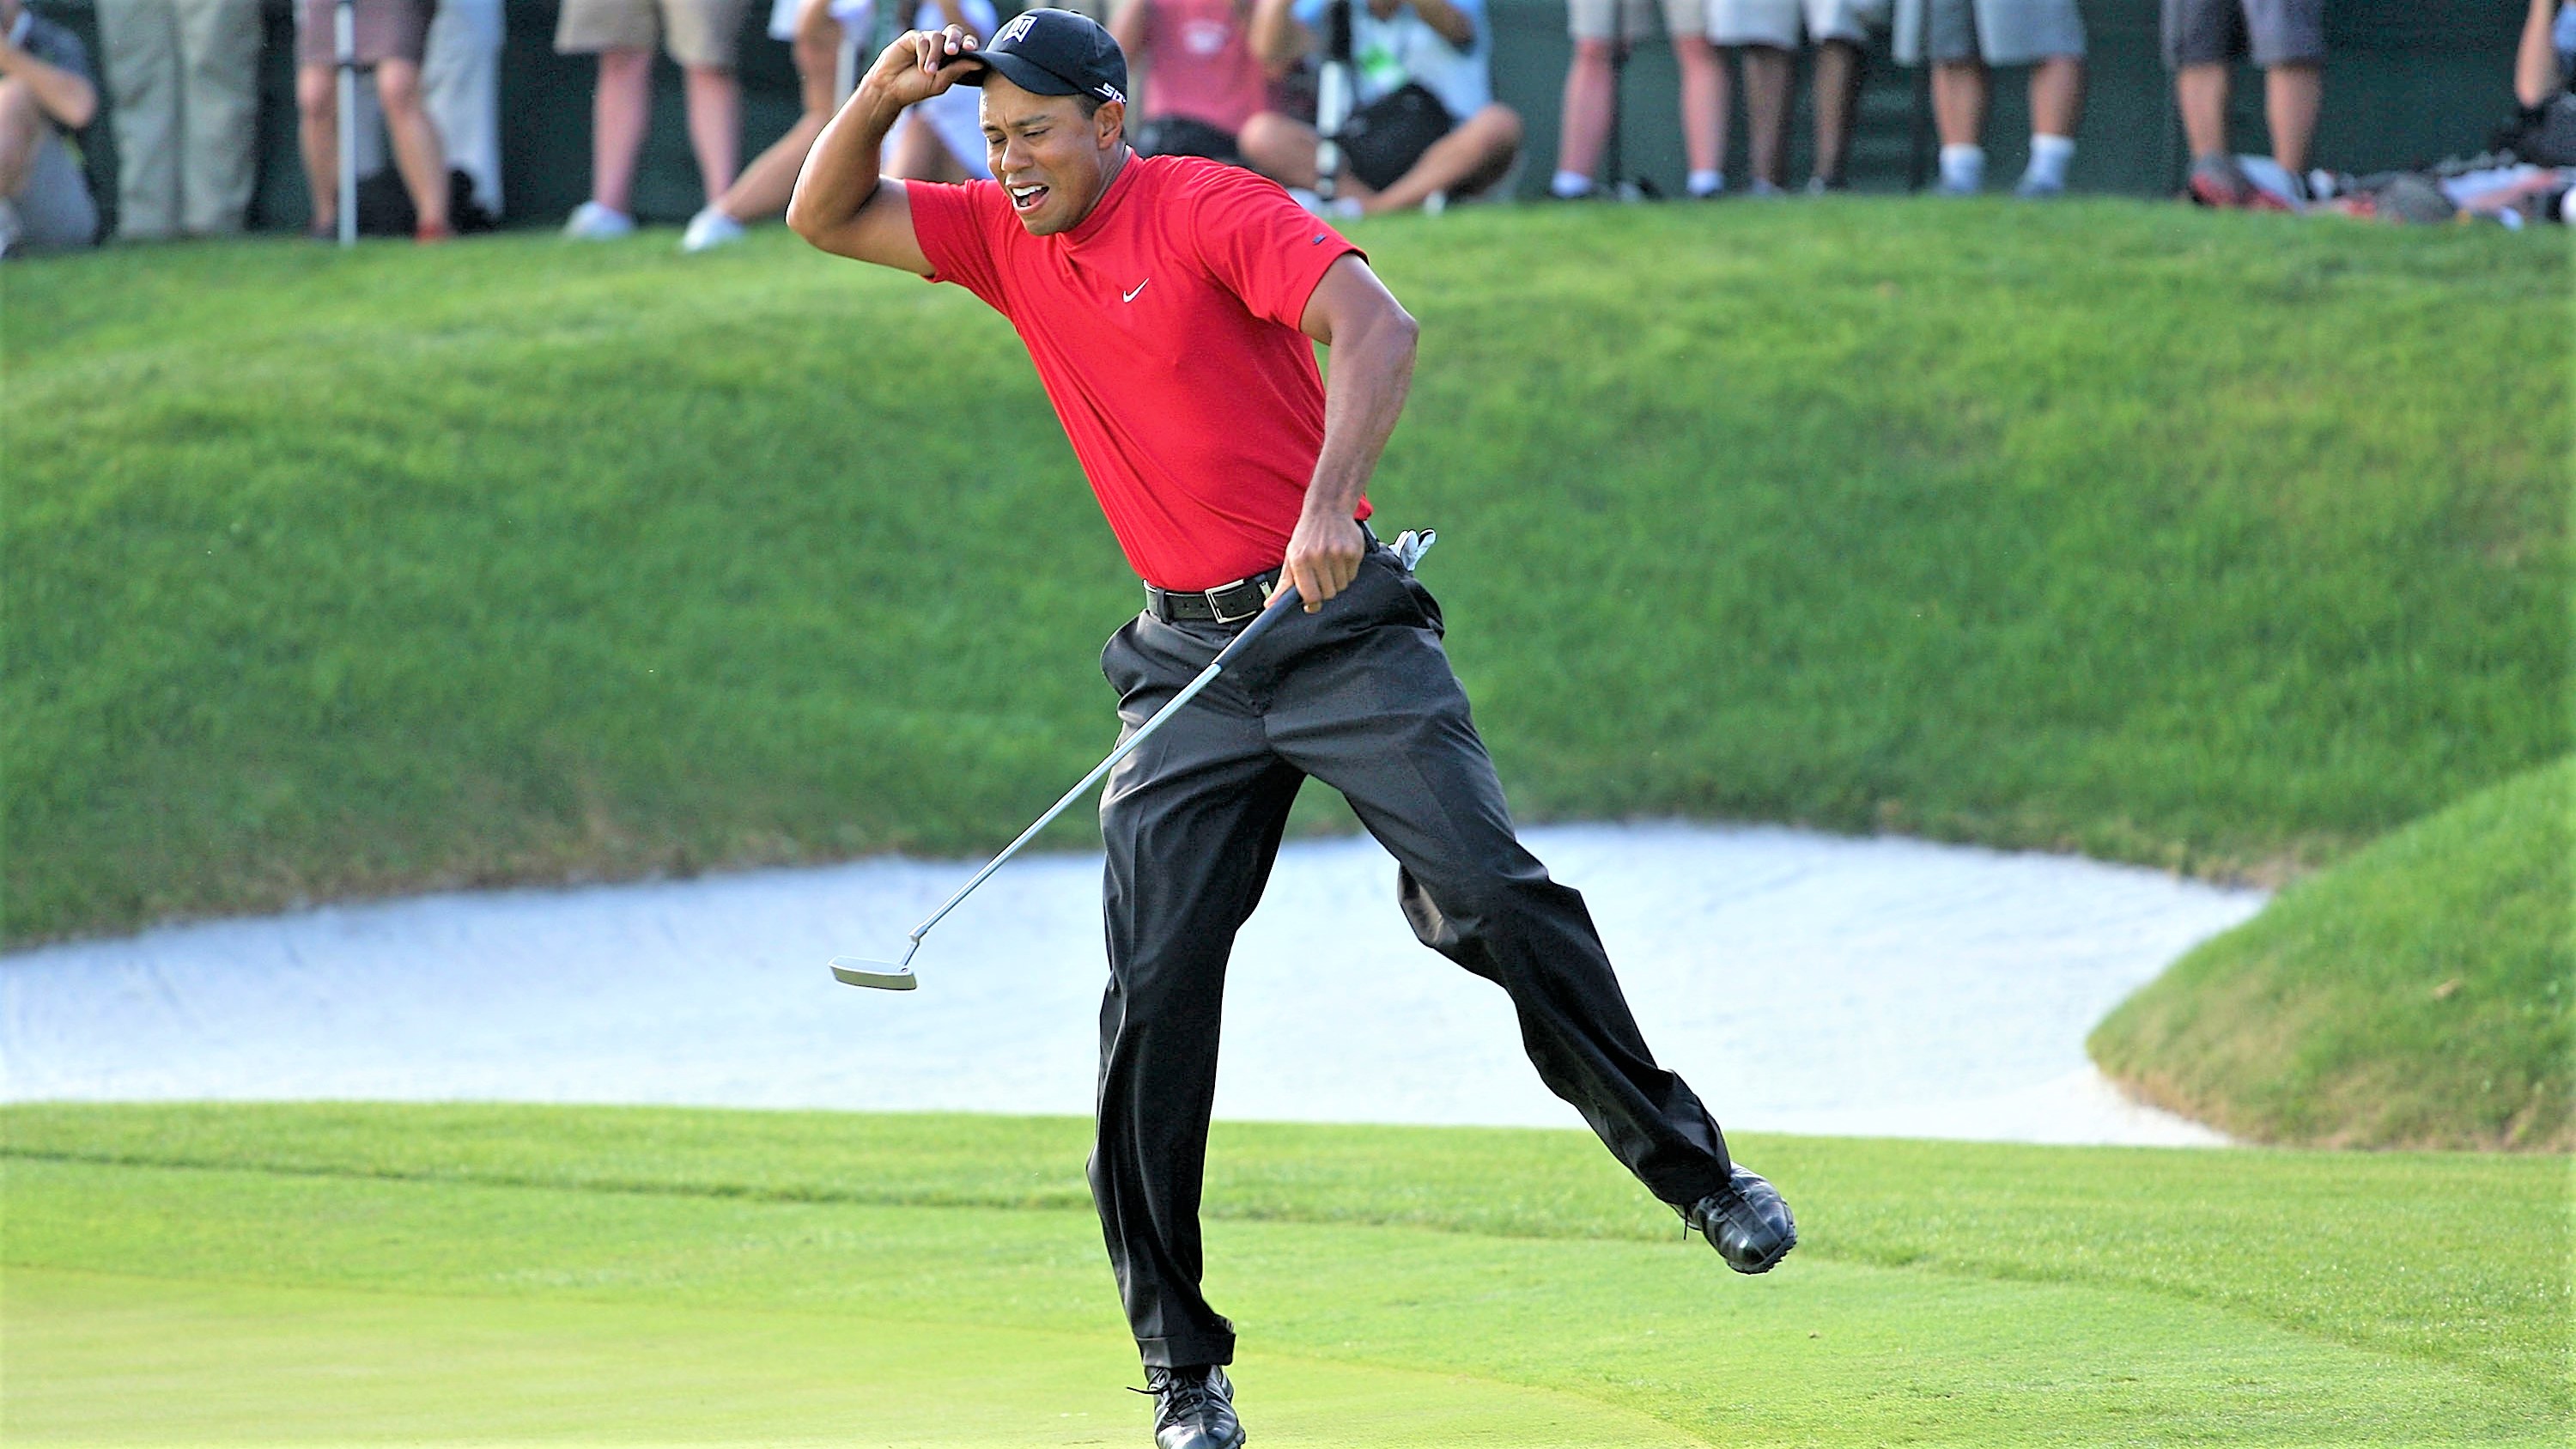 In which year did Tiger Woods win his most recent U.S. Open?